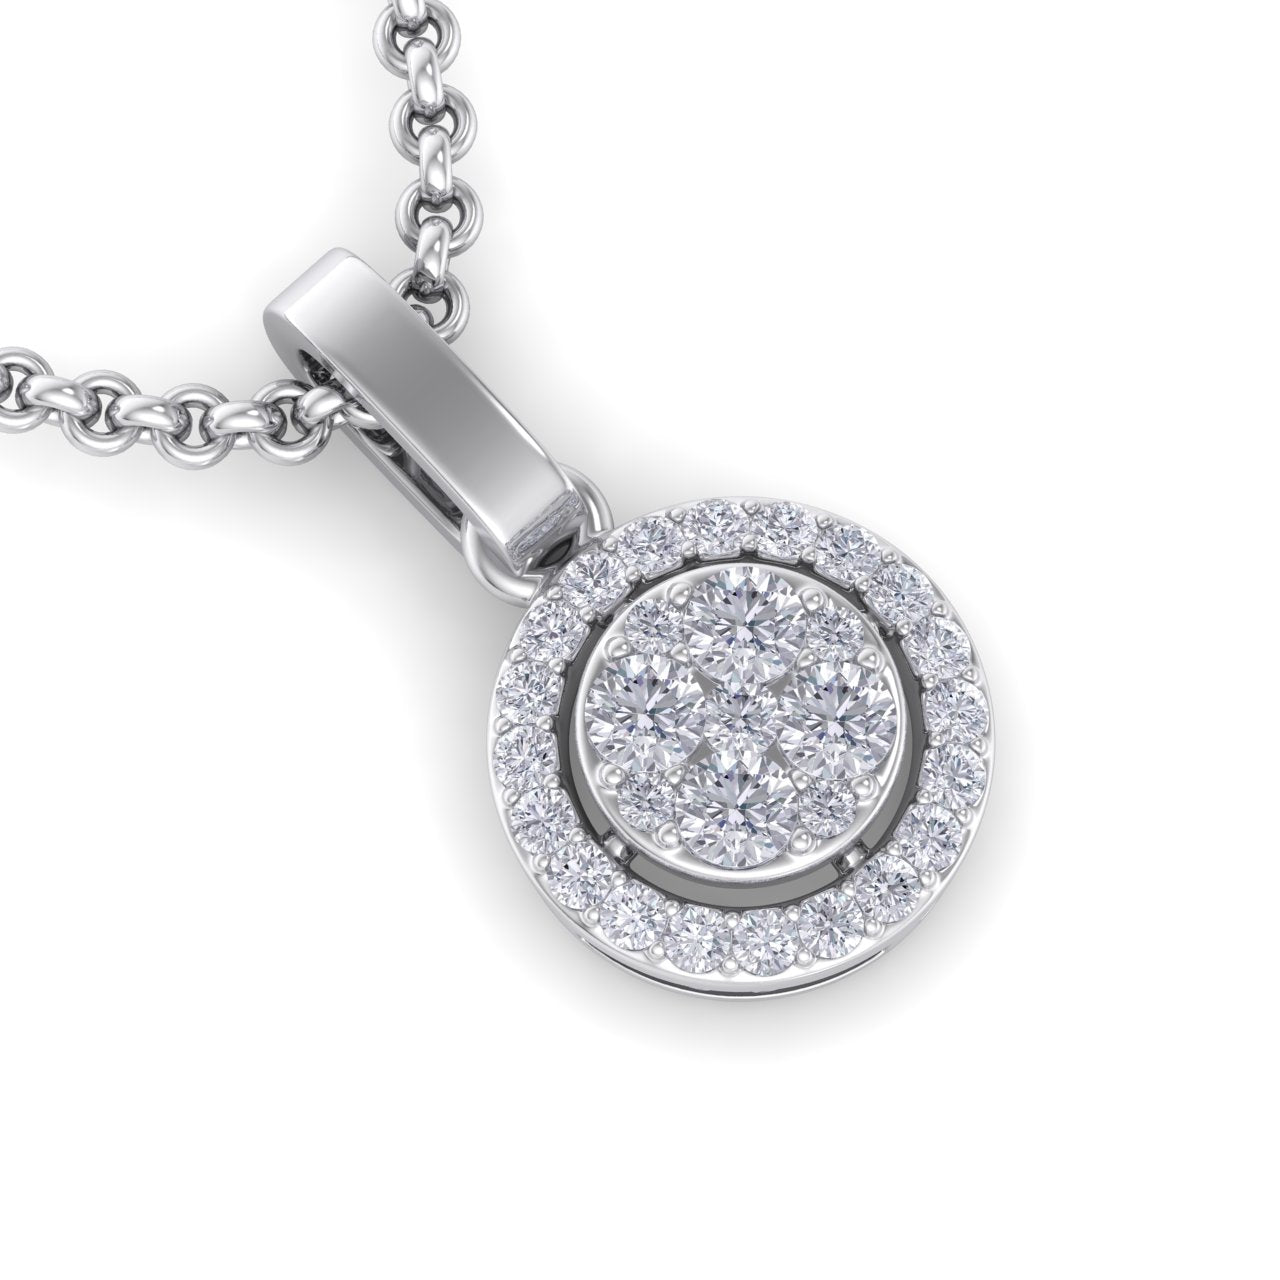 Halo pendant in yellow gold with white diamonds of 0.37 ct in weight